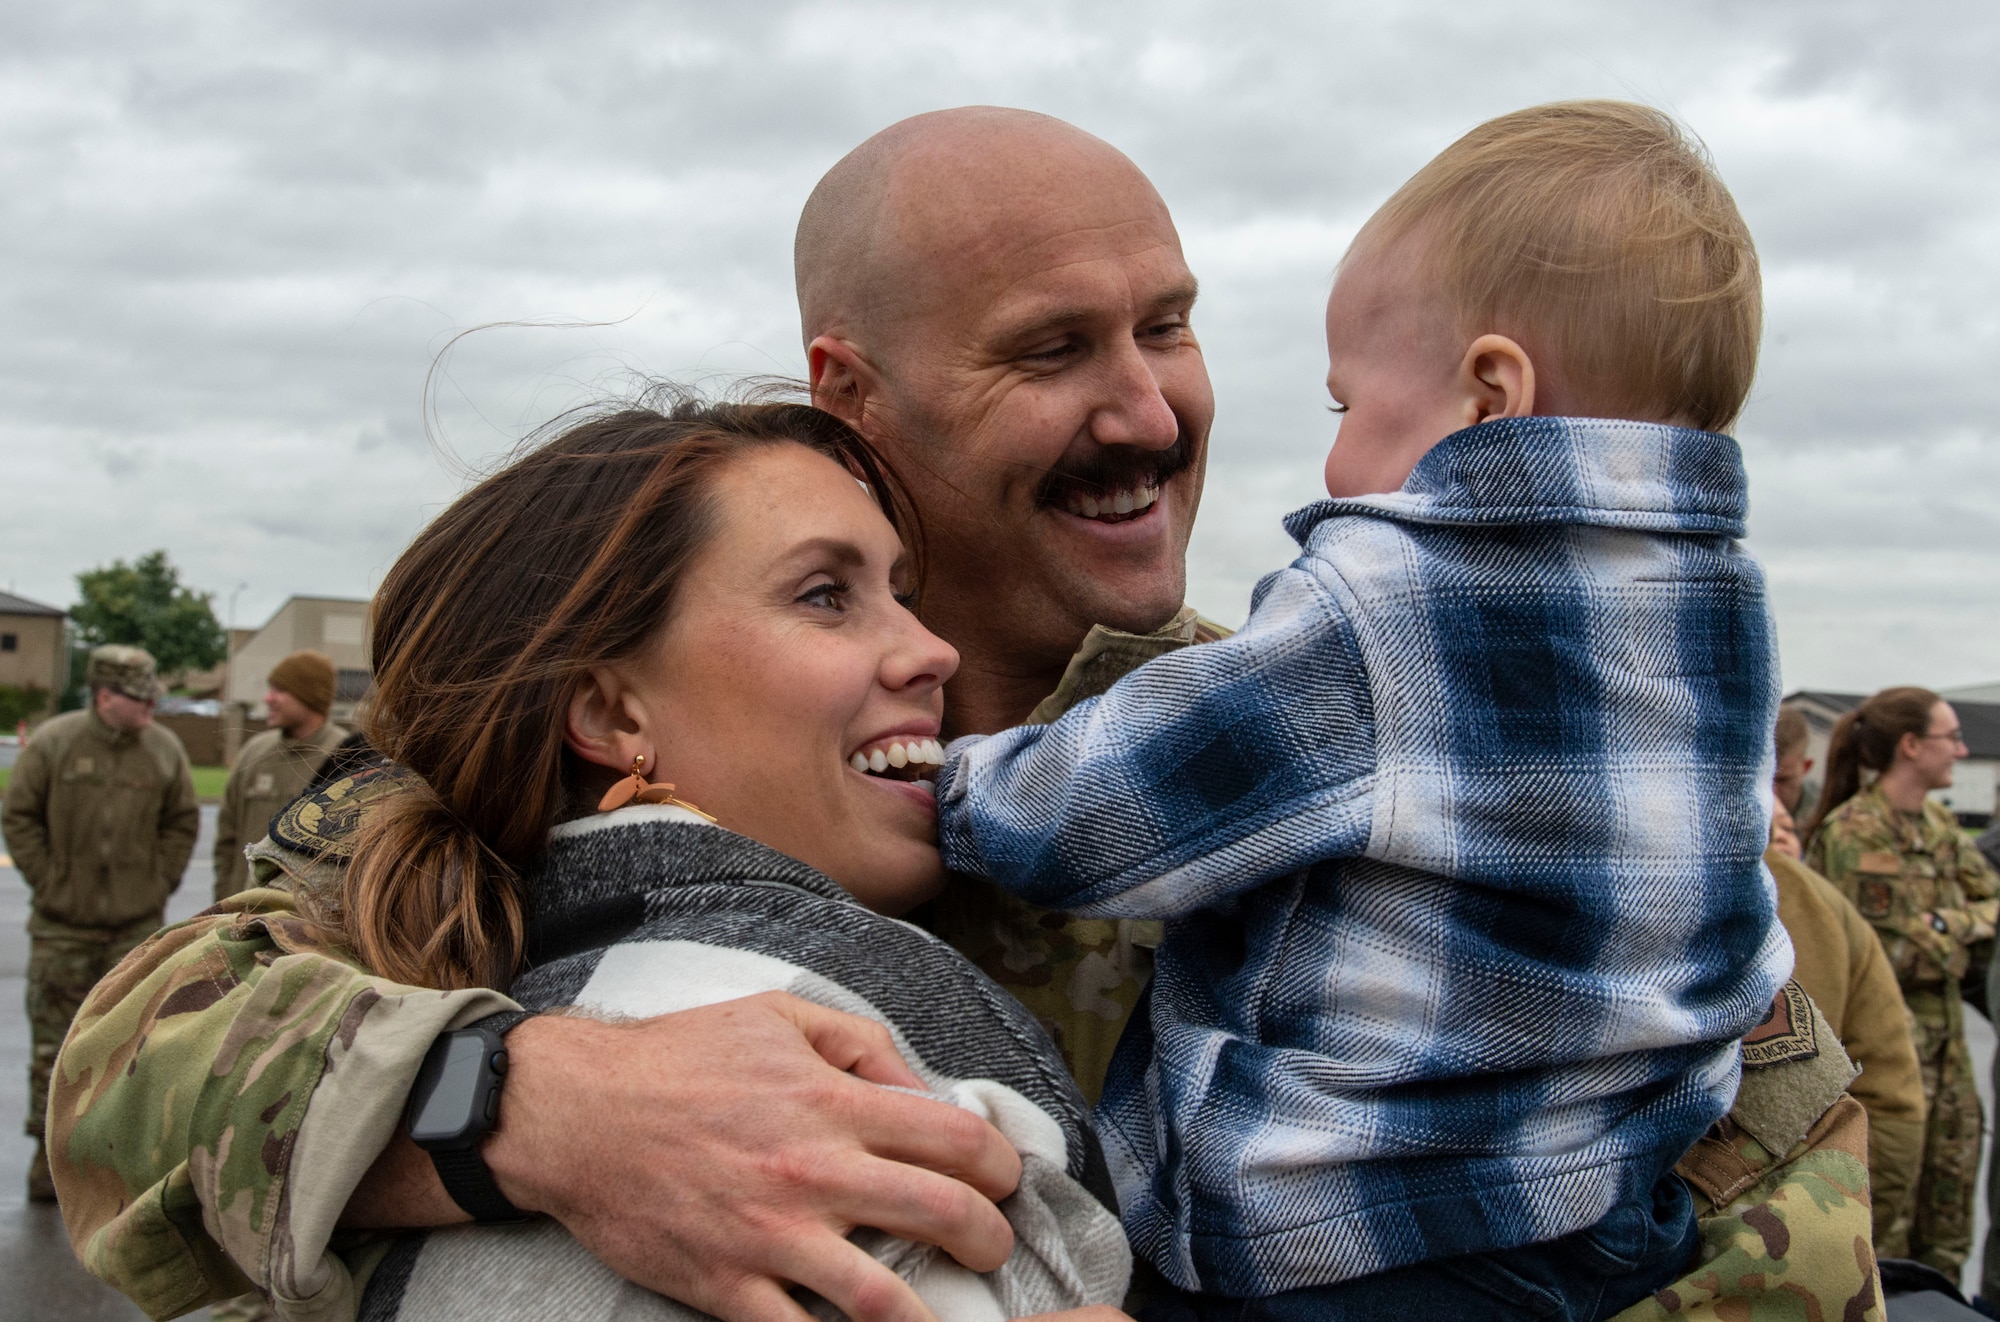 Capt. Ben Bertelson, center, 3rd Airlift Squadron C-17 Globemaster III pilot, hugs his wife Amanda and son Beau upon returning to Dover Air Force Base, Delaware, Oct. 3, 2022. Members from the 3rd AS, 436th Mission Generation Group and 436th Security Forces Squadron were greeted by family, fellow squadron and Team Dover members after a deployment to Al Udeid Air Base, Qatar. (U.S. Air Force photo by Roland Balik)